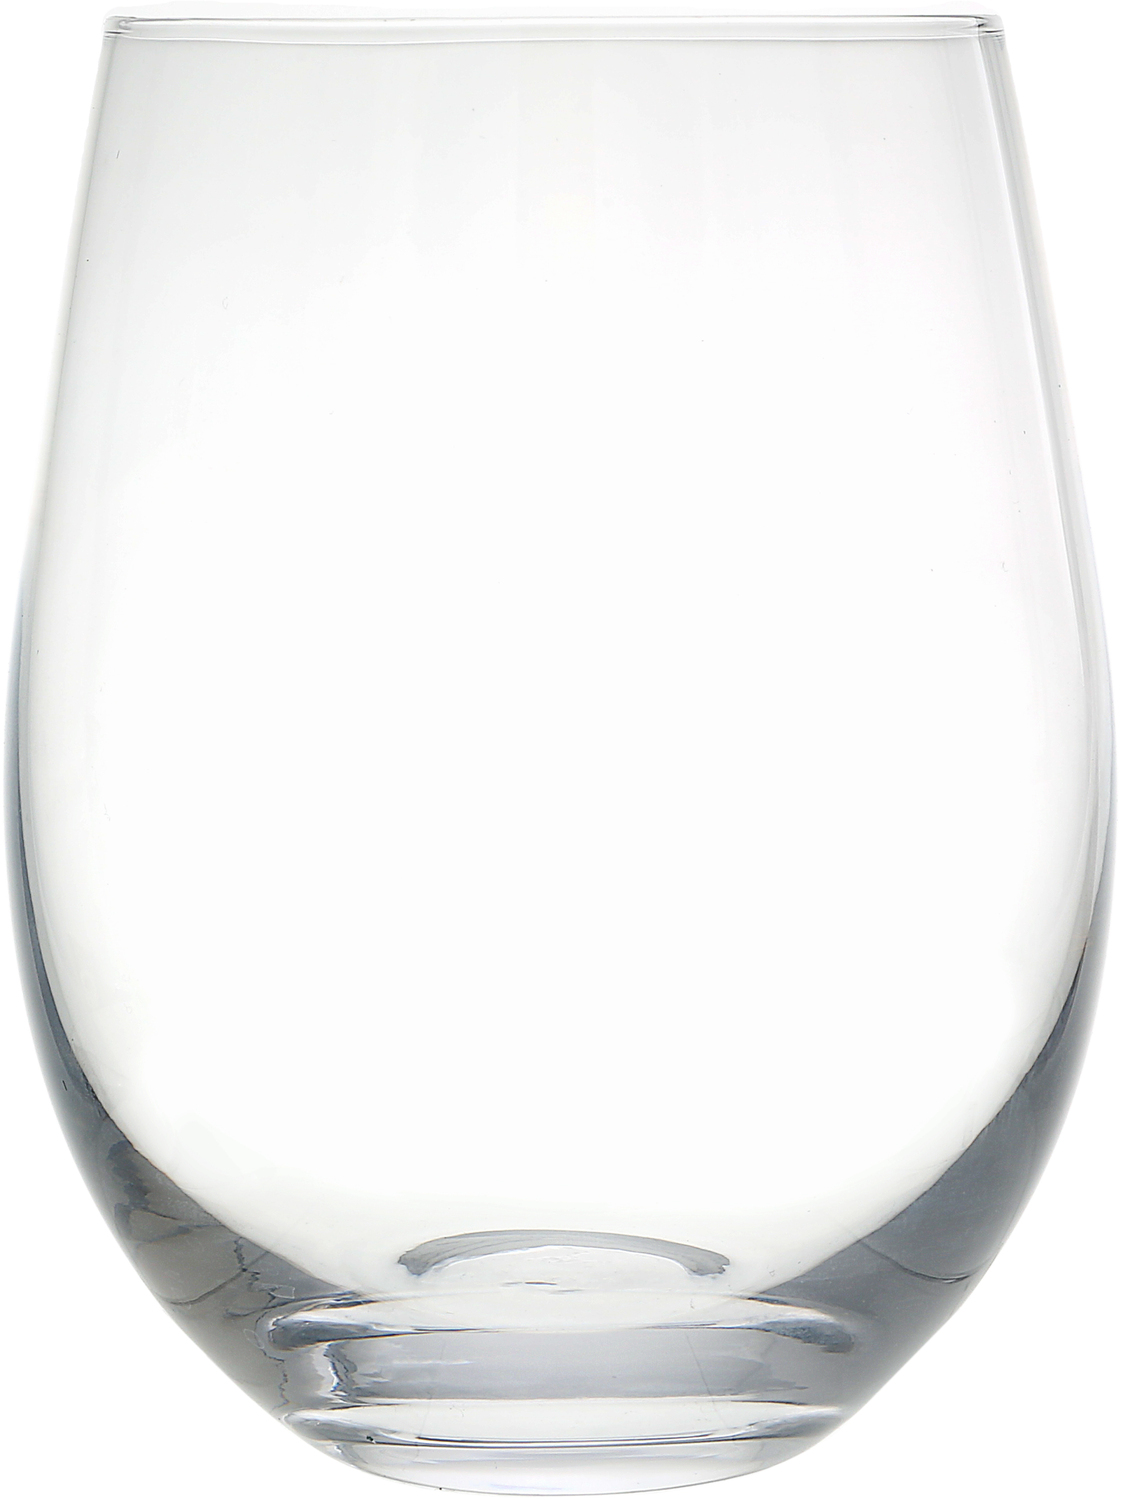 Blank Stemless Wine Glass by Personalization - Blank Stemless Wine Glass - 18 oz Stemless Wine Glass